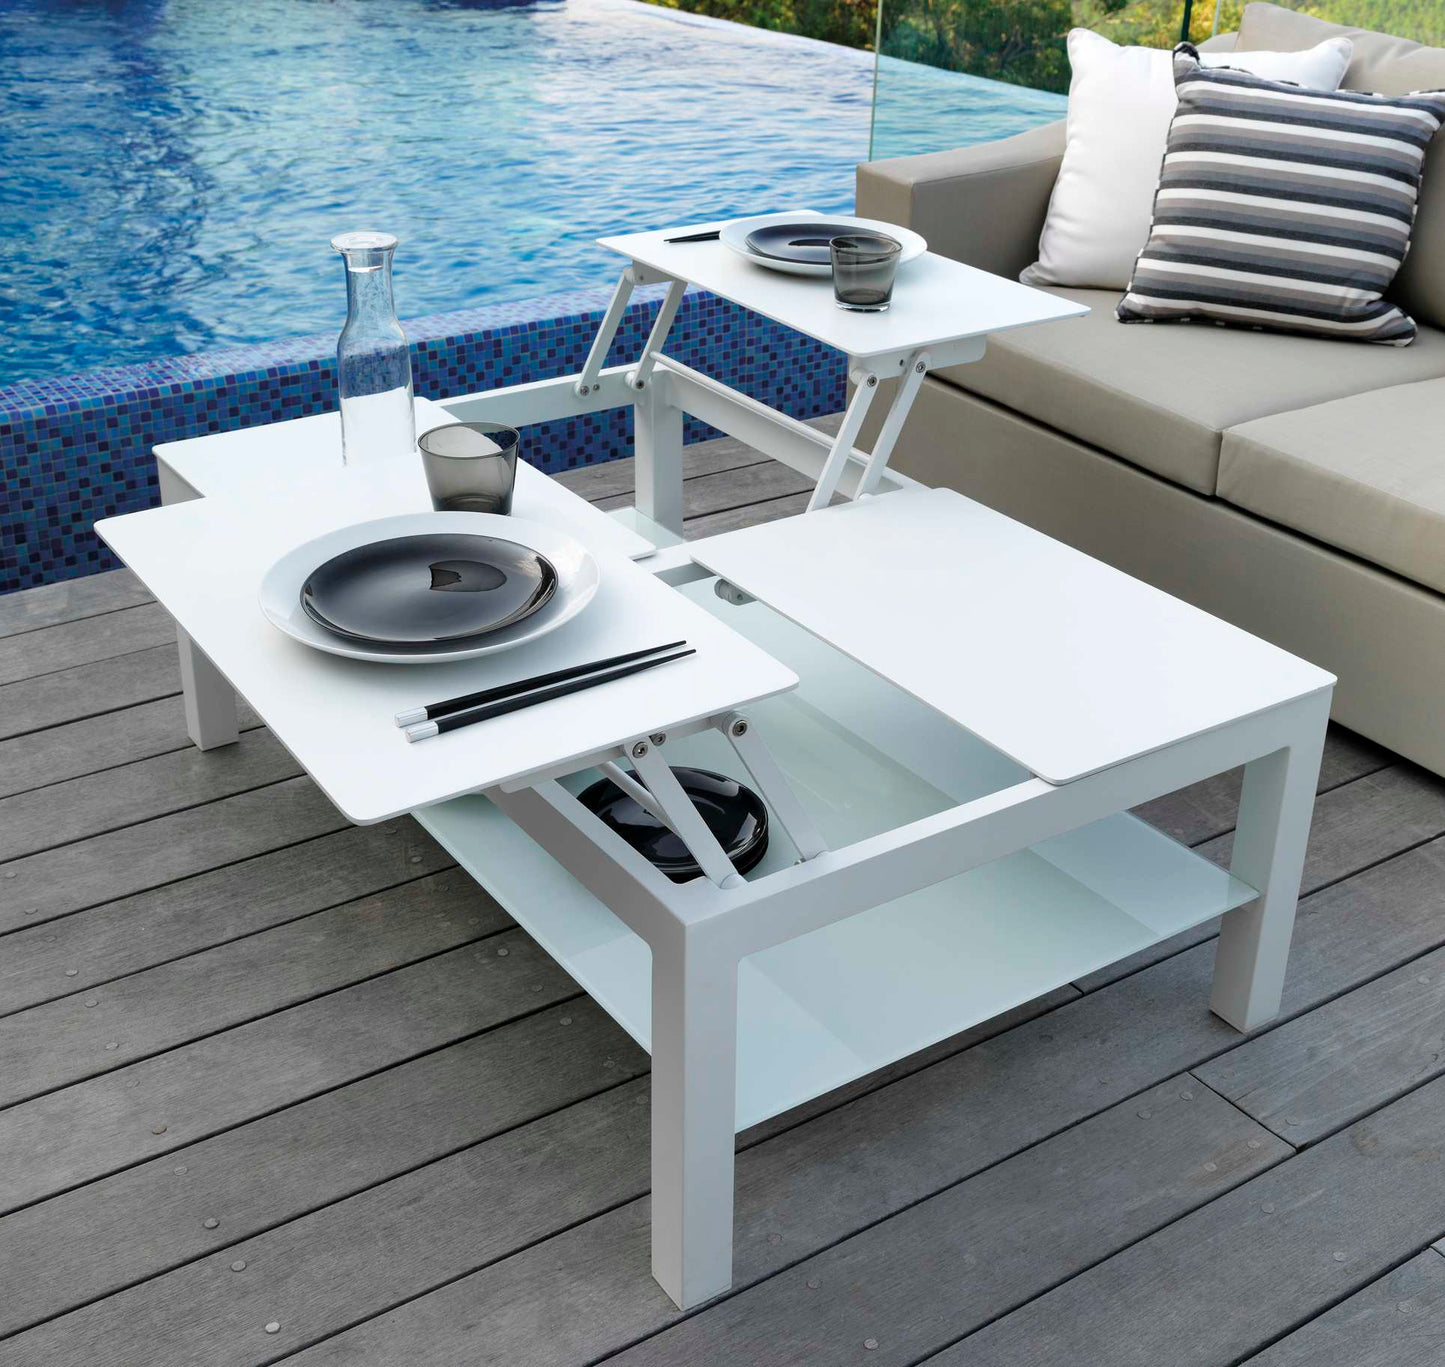 TALENTI | CHIC  LARGE EXTENDABLE COFFEE TABLE - $2,558.27